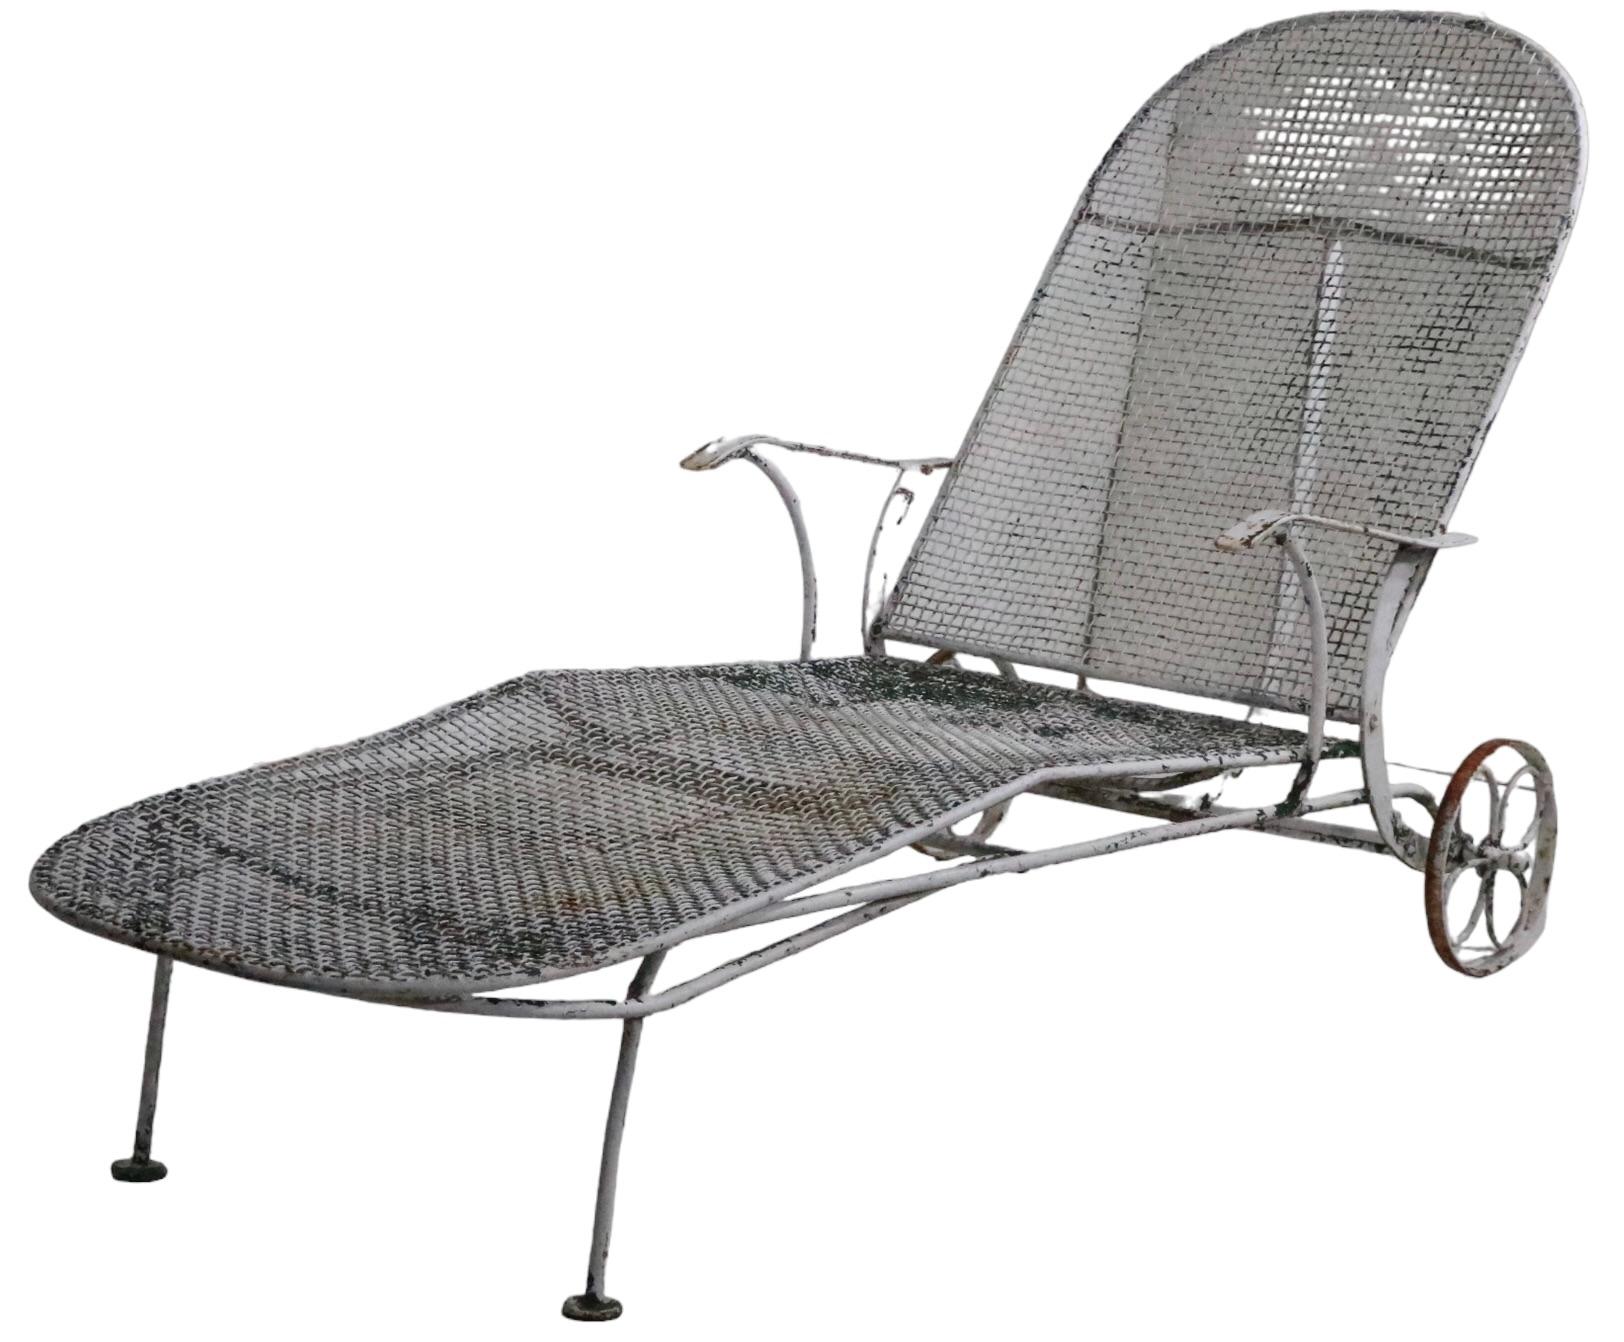  Wrought Iron Garden Poolside Patio Woodard Sculptura Chaise Lounge c. 1950's For Sale 1